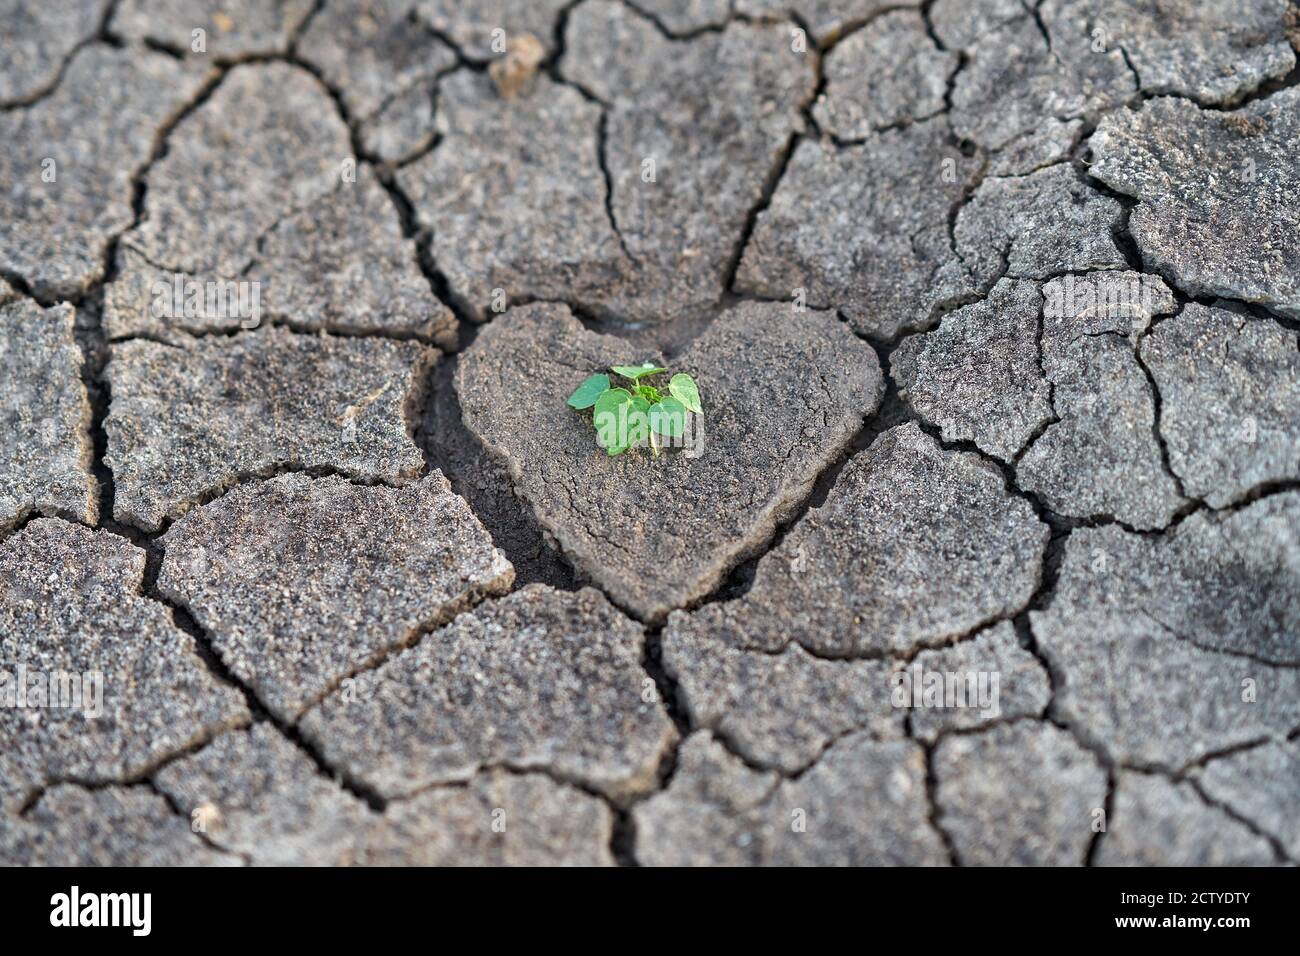 Dry parched earth, with a heart shaped center with some green plant. Stock Photo